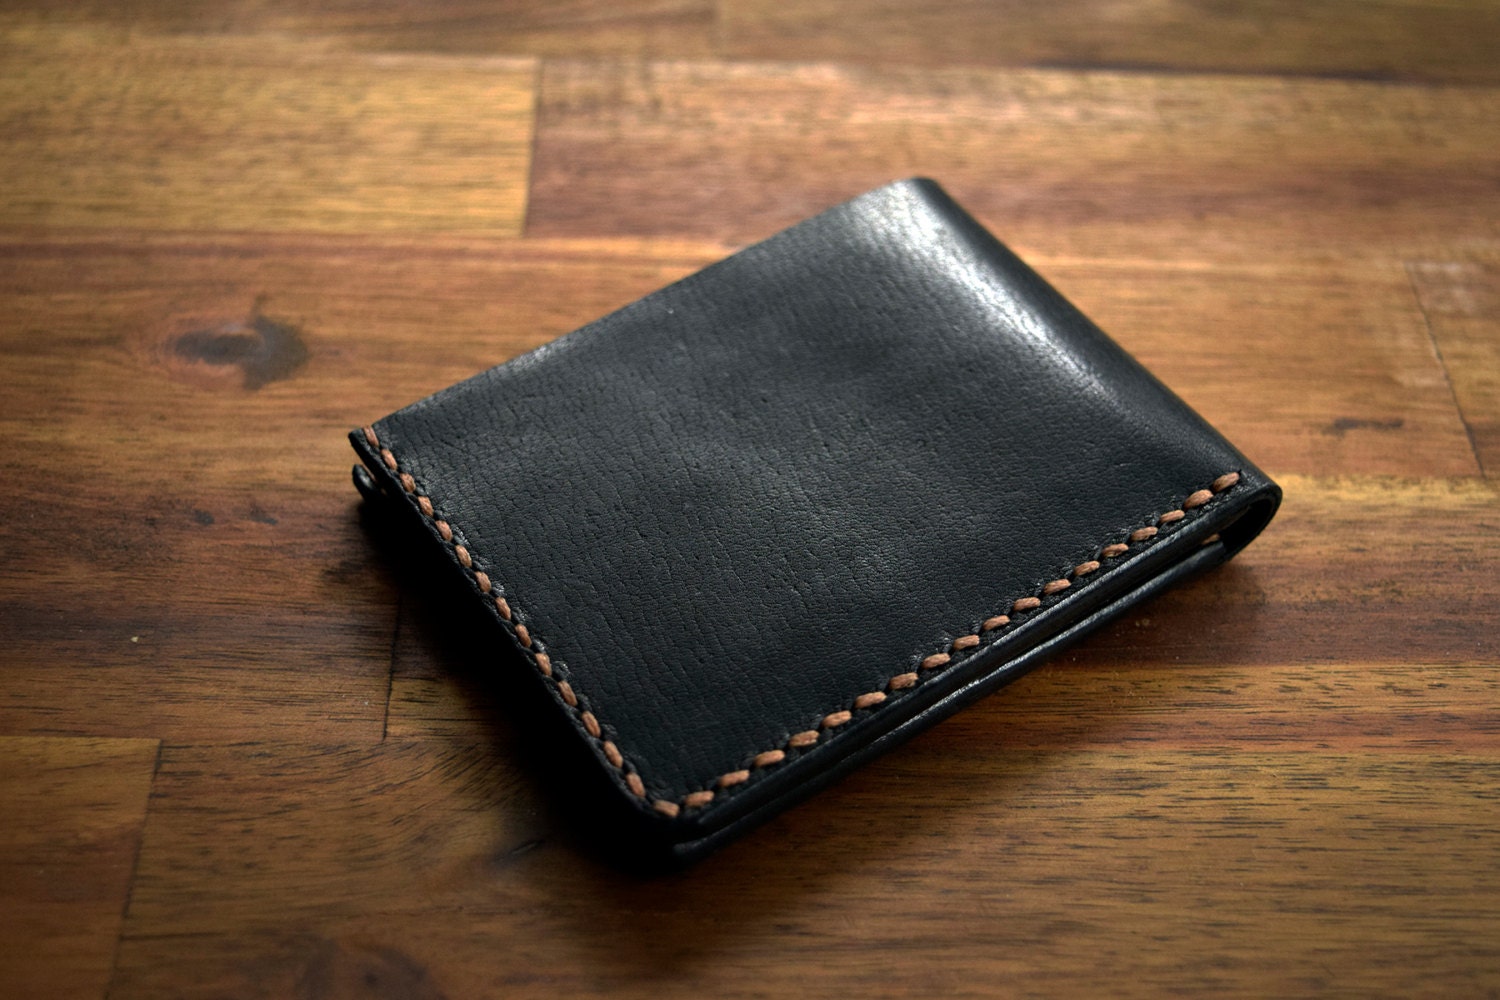 Kangaroo Leather Wallet, posted a month ago. Here are my thoughts